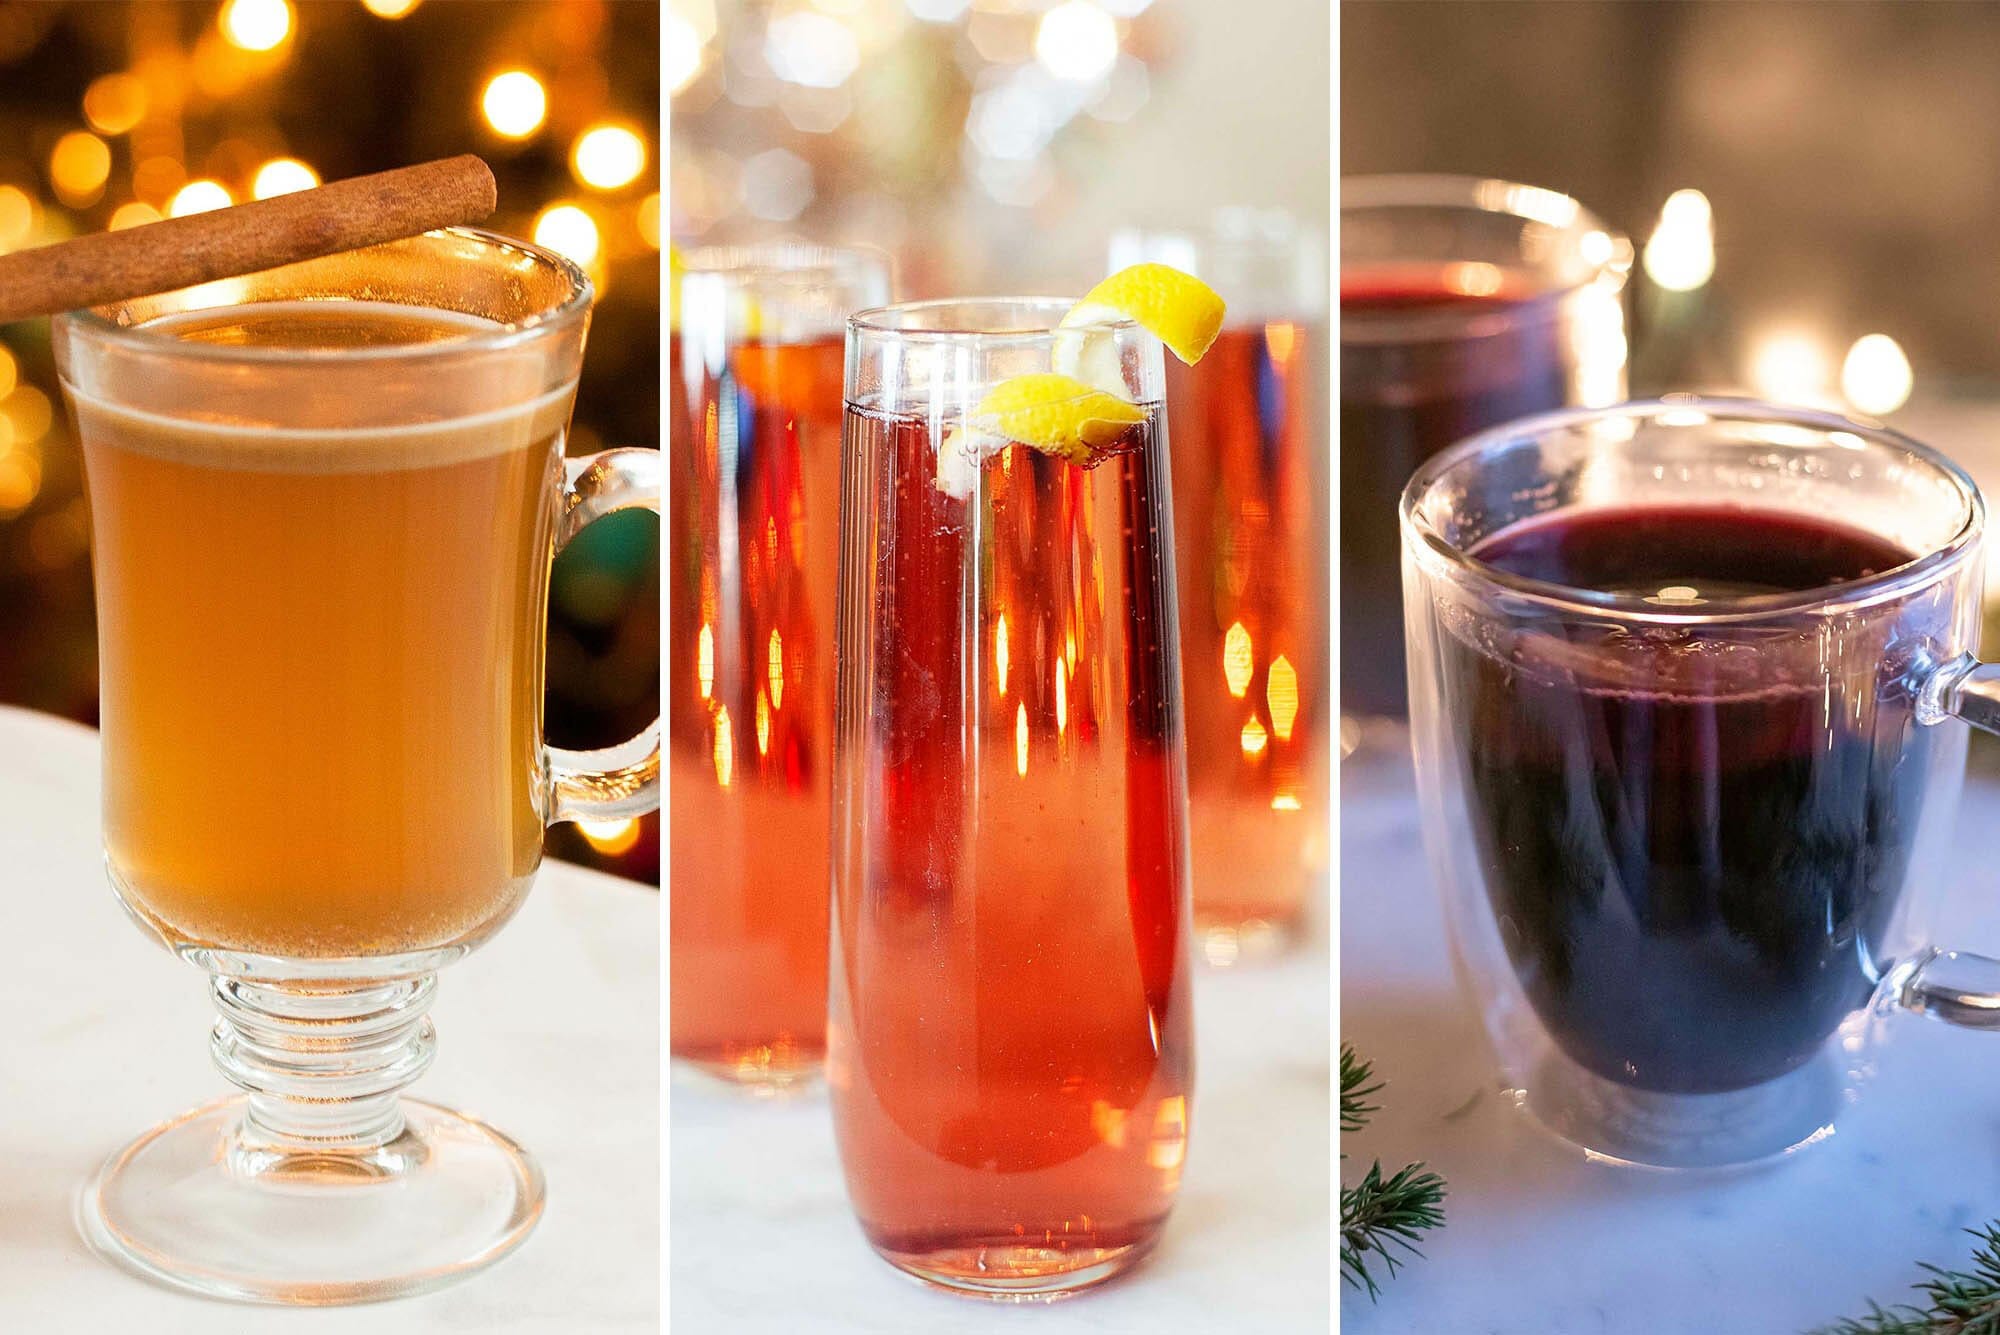 Three photos side by side. To the left is a glass mug of Hot Buttered Rum, in the center are three flutes of Chamb' and Bubbly. To the right is a glass mug of hot mulled wine.